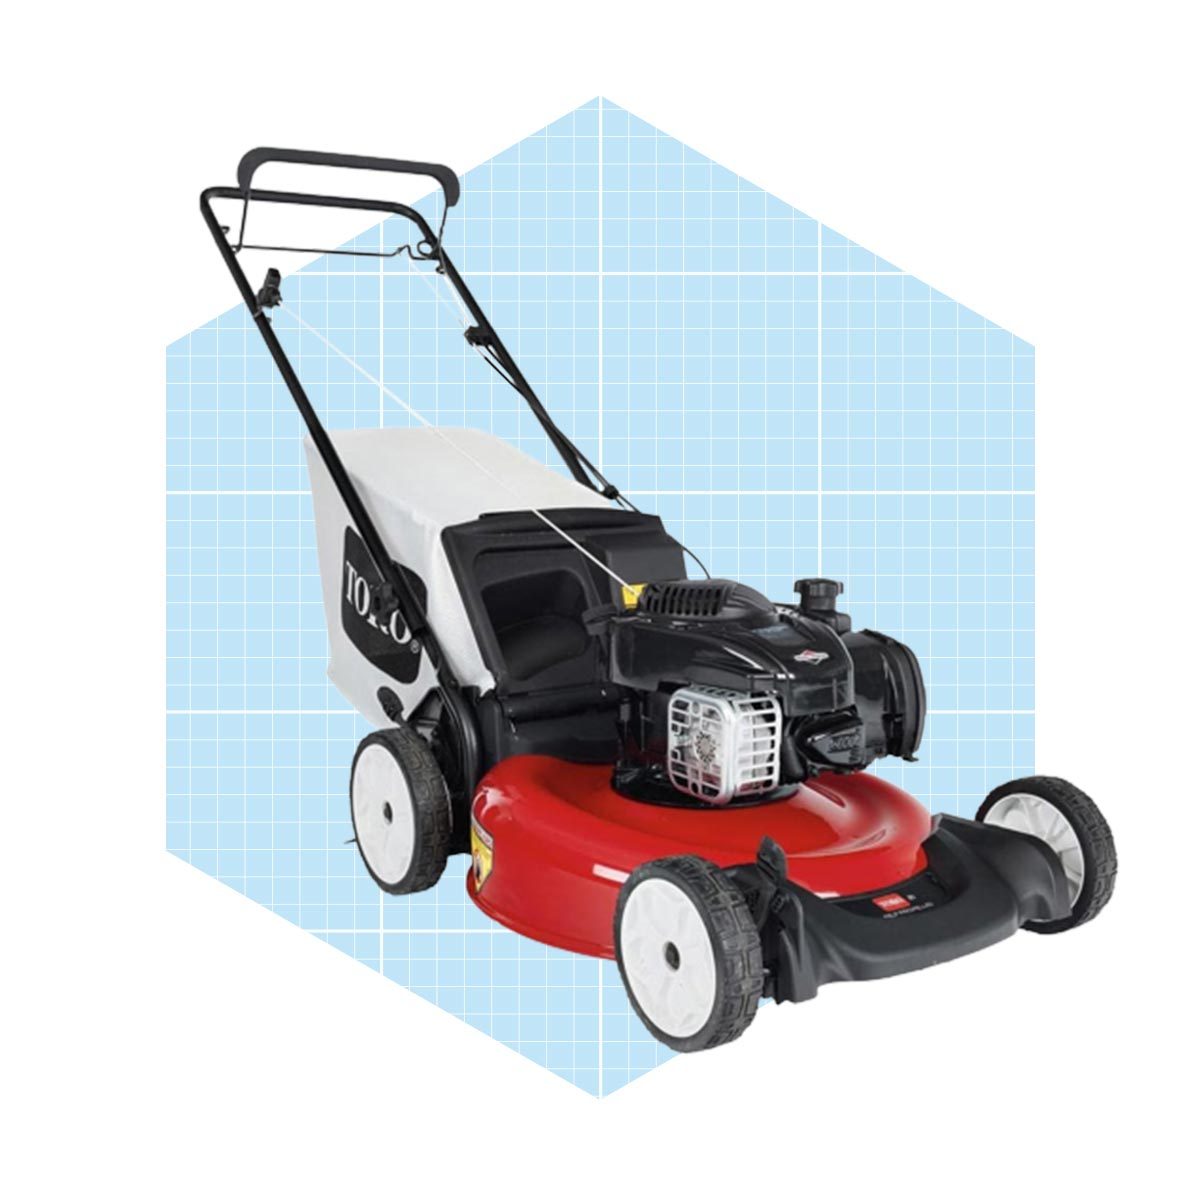 Best Gas Powered Push Mower For Value